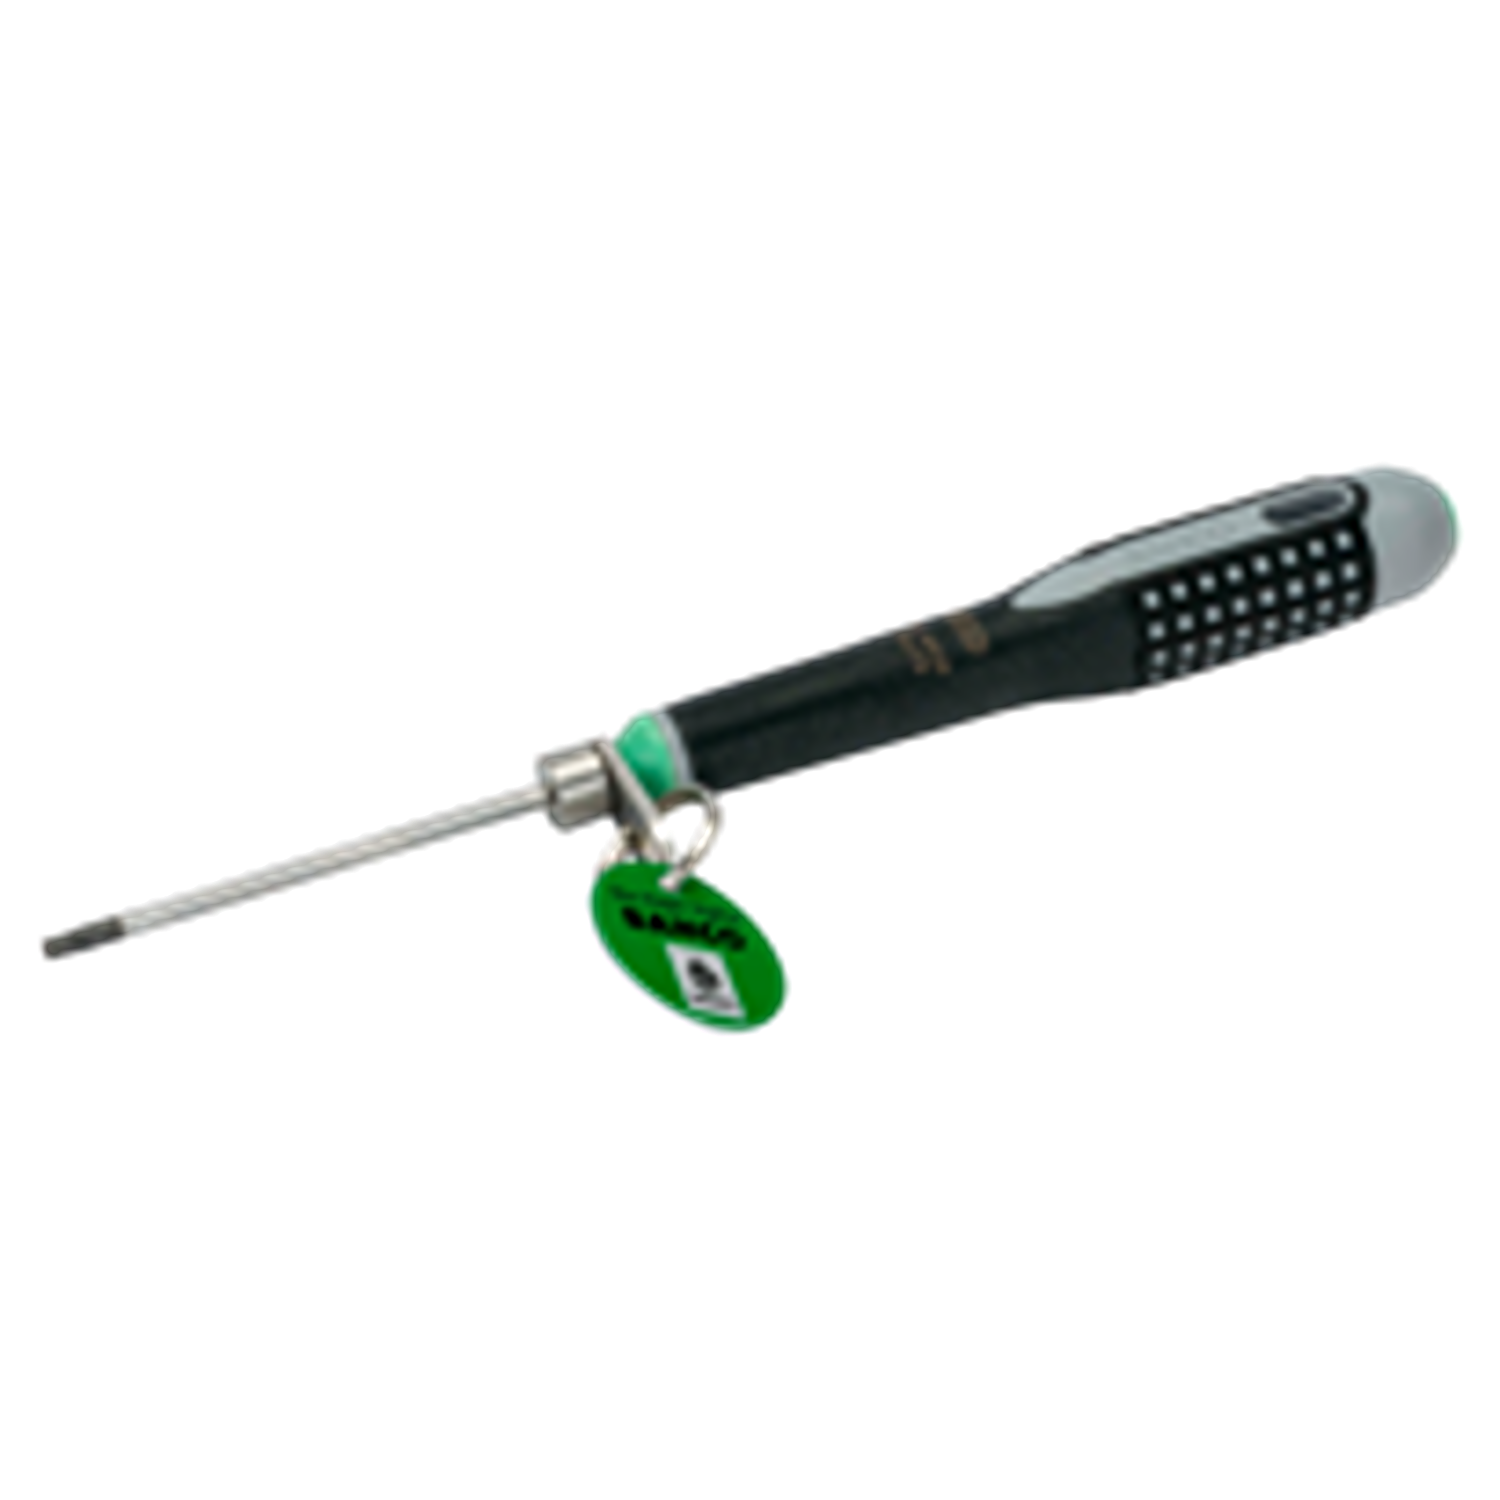 BAHCO TAHBE8910-TAHBE8930 ERGO TORX Screwdriver with Safety Chuck - Premium TORX Screwdriver from BAHCO - Shop now at Yew Aik.